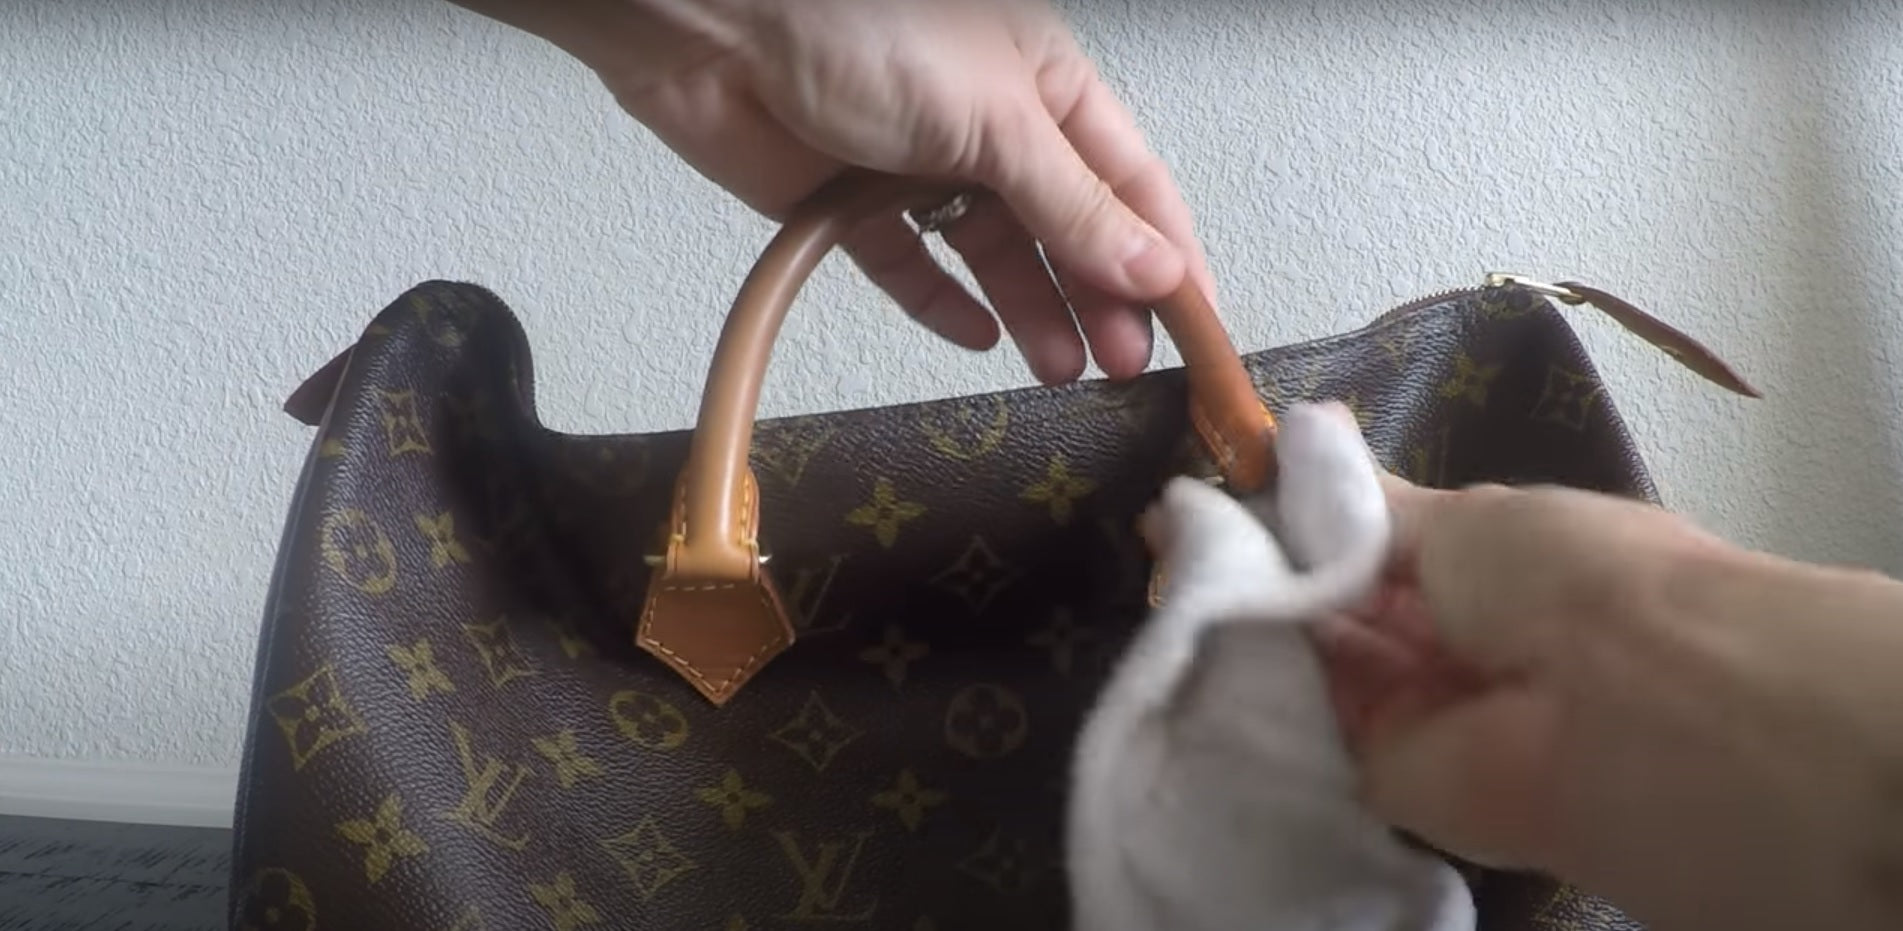 How to Clean Louis Vuitton Vachetta Leather, Apple Garde Experiment